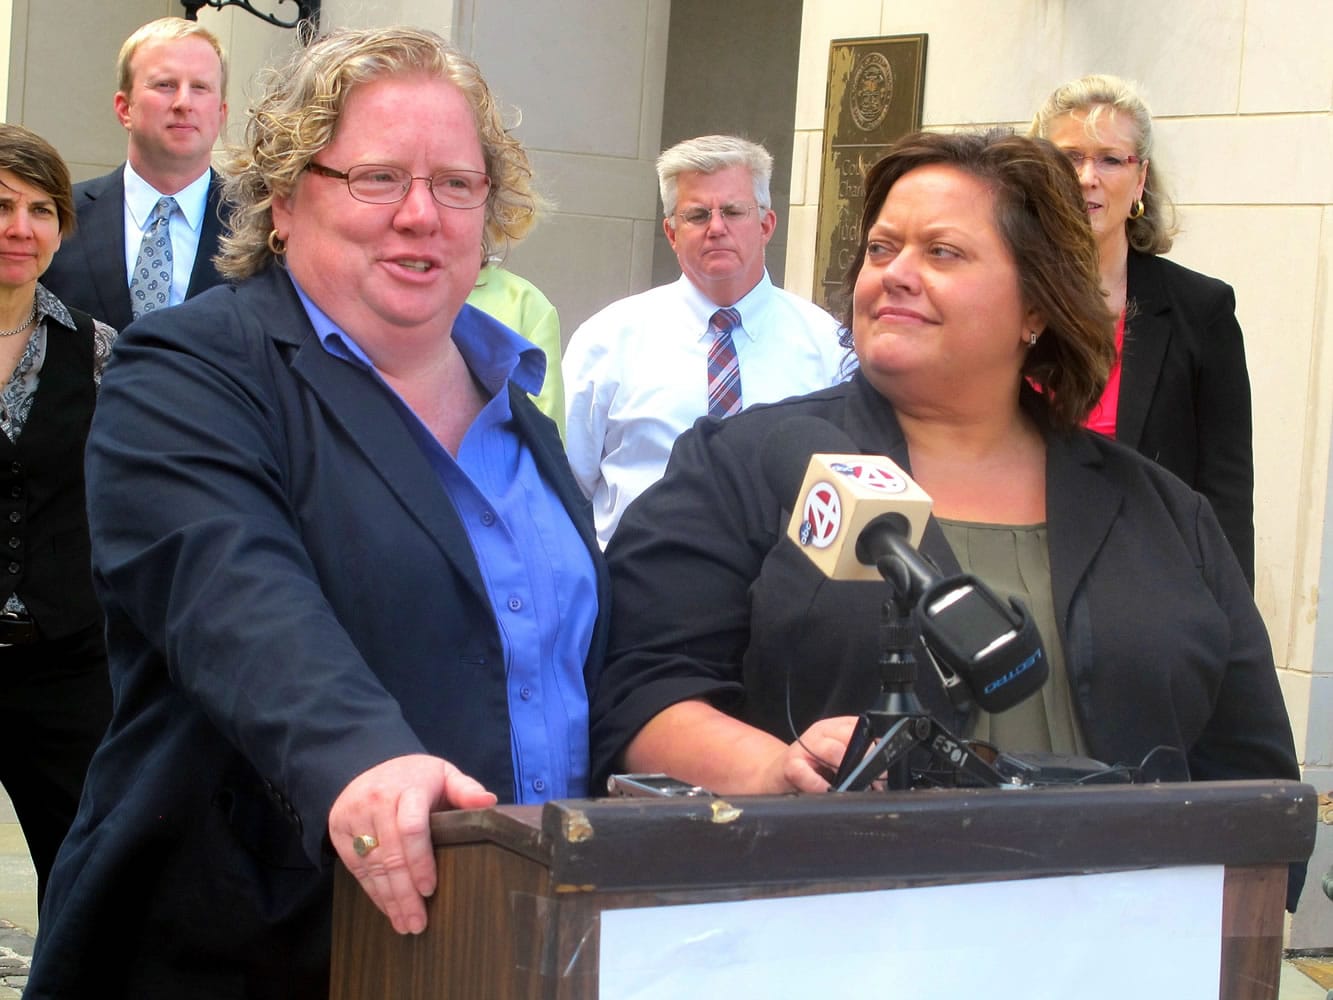 Colleen Condon, left, and her partner Nichols Bleckley appear at a news conference Oct.